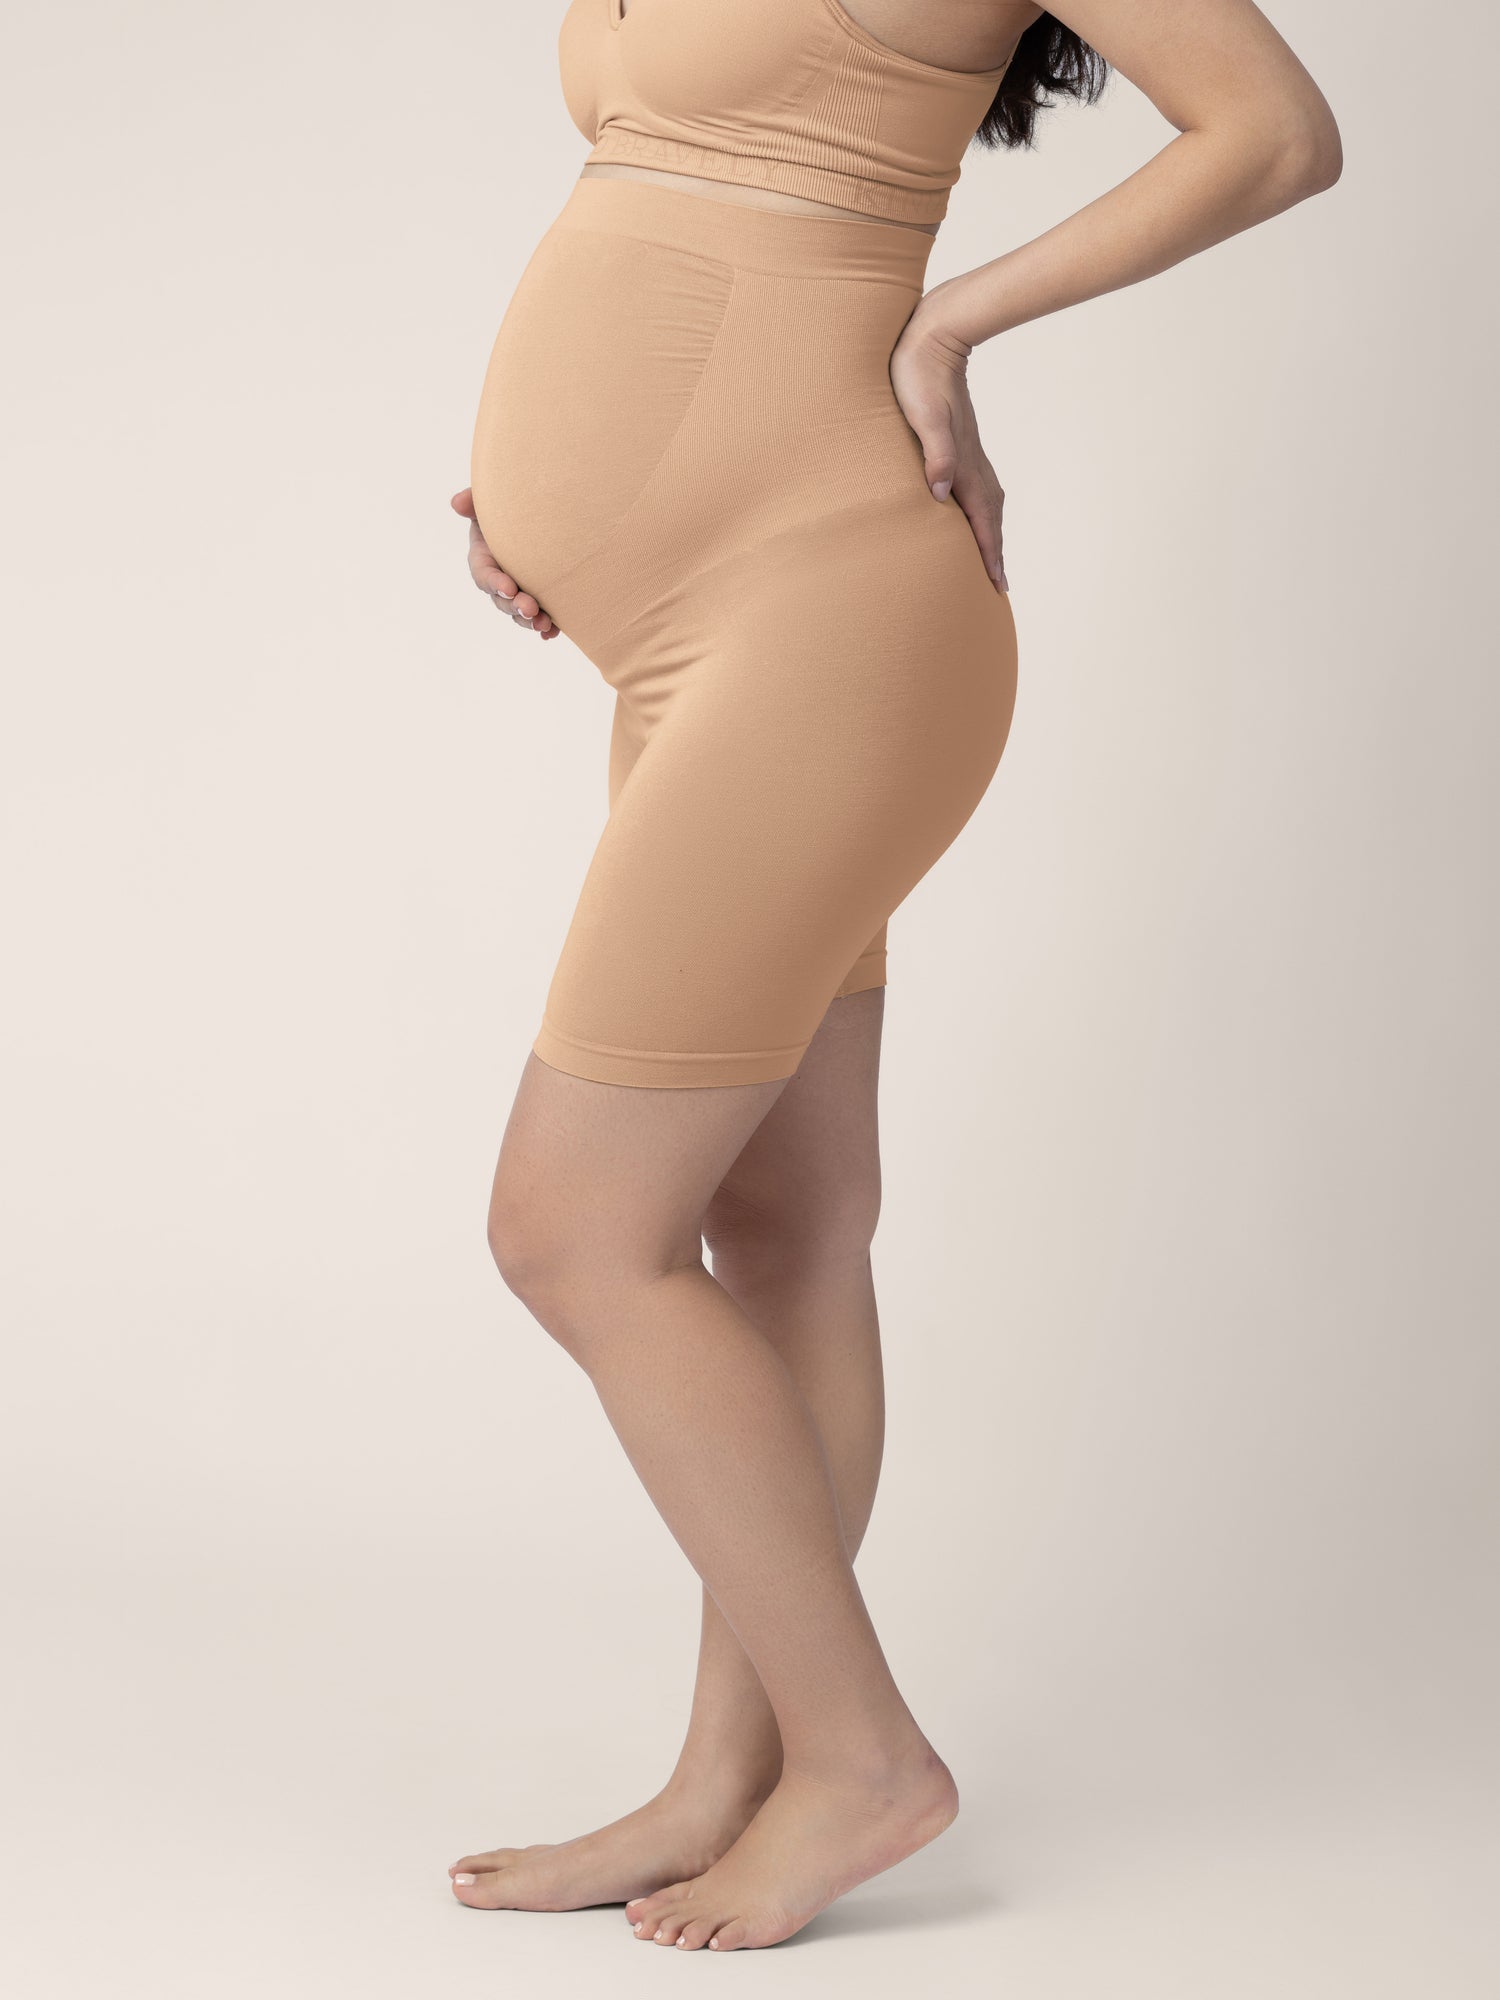 Pregnant model wearing the Seamless Bamboo Maternity Thigh Savers in Beige with her hand on her stomach and her back.